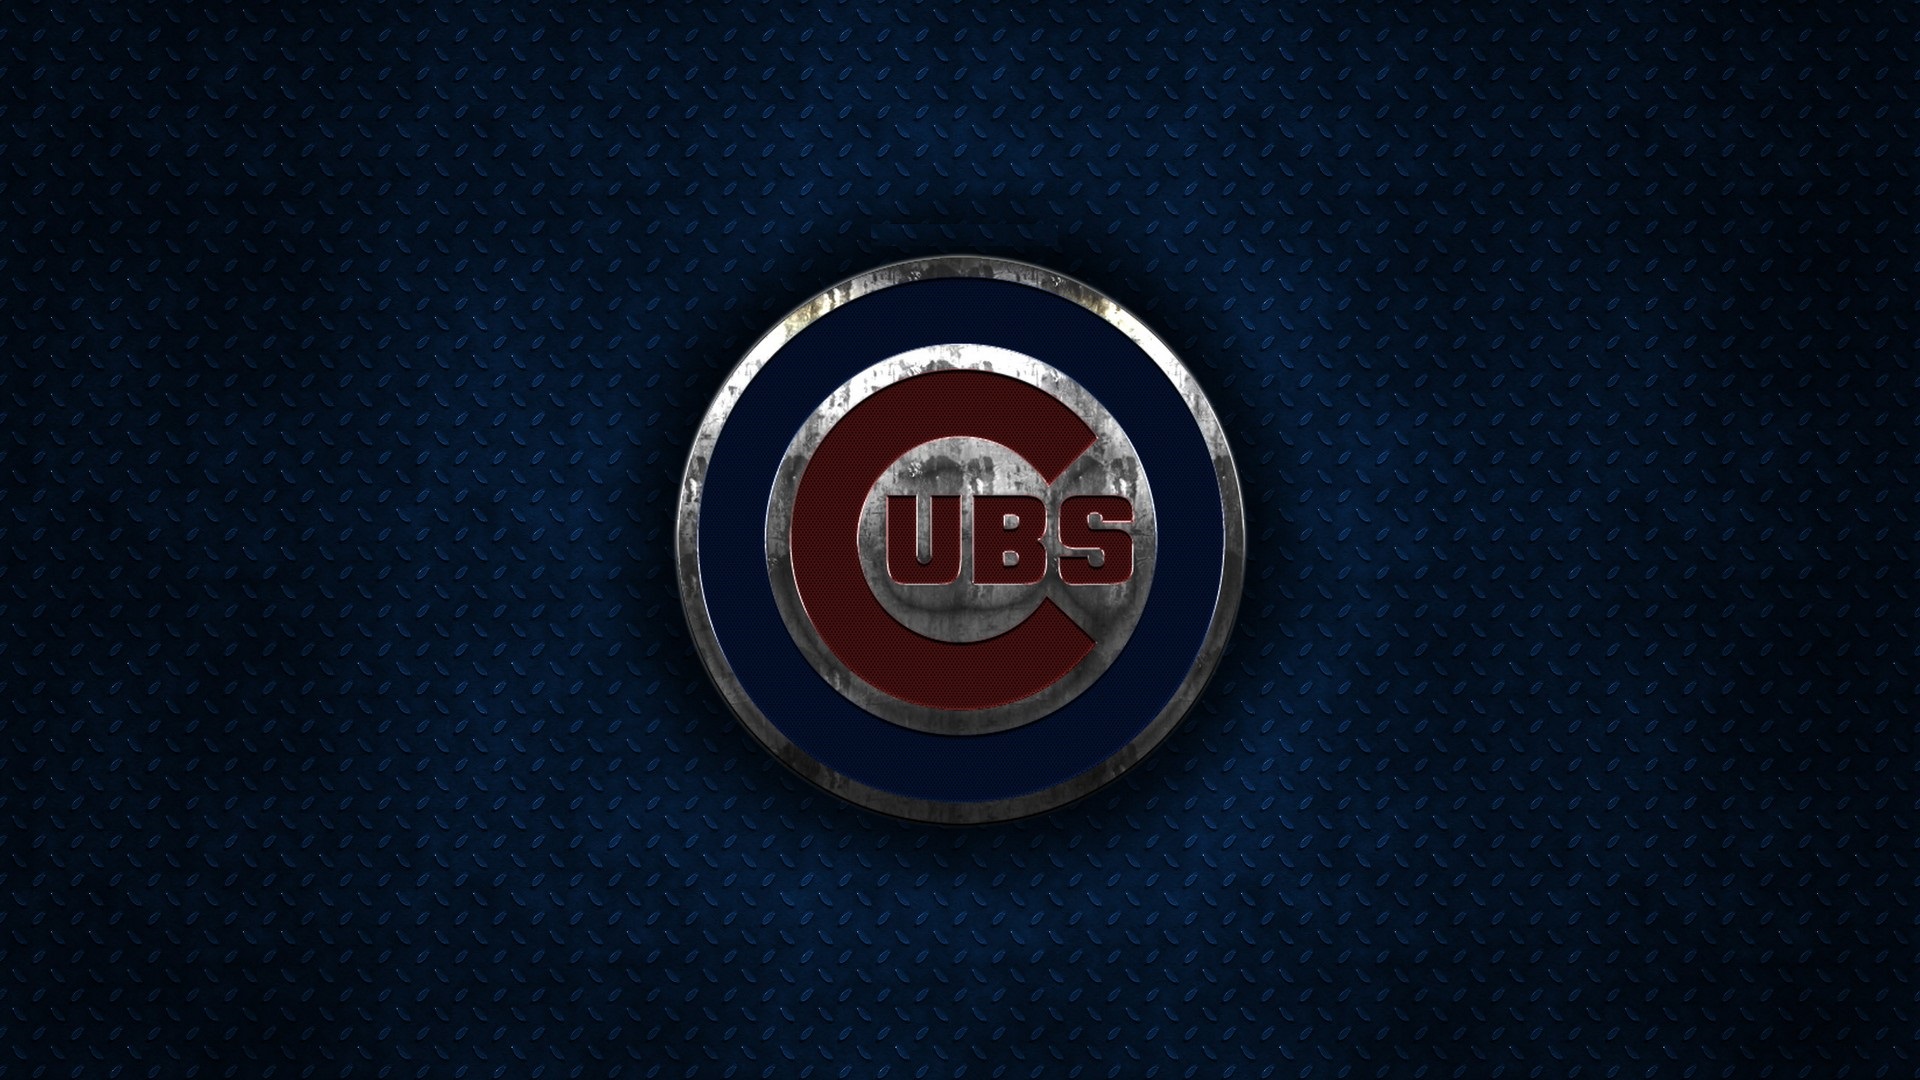 Chicago Cubs MLB Wallpaper For Mac With high-resolution 1920X1080 pixel. You can use this wallpaper for Mac Desktop Wallpaper, Laptop Screensavers, Android Wallpapers, Tablet or iPhone Home Screen and another mobile phone device